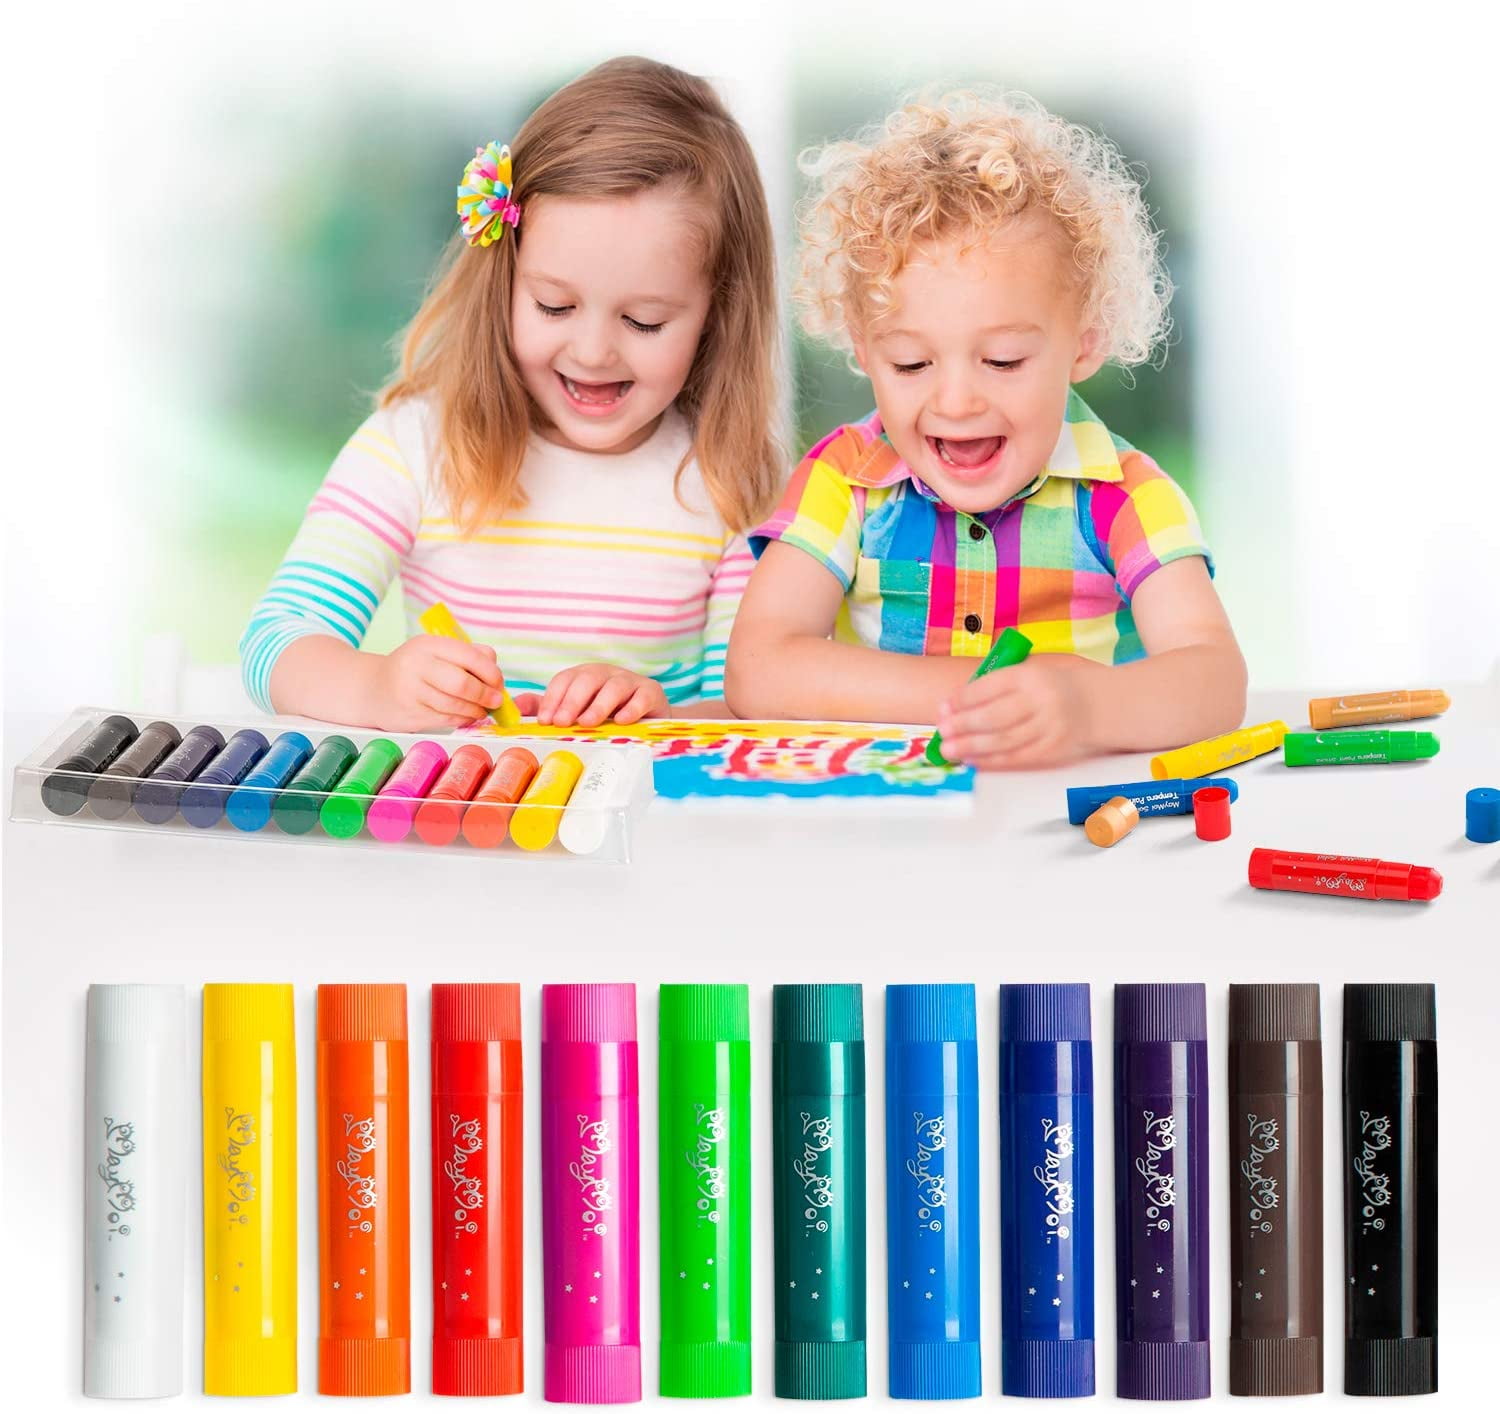 OOLY Chunkies Twistable Tempera Paint Sticks For Kids, No Mess Kids Art  Supplies for Kids 4-6, Mess Free Coloring for Toddlers, Classroom Supplies  for